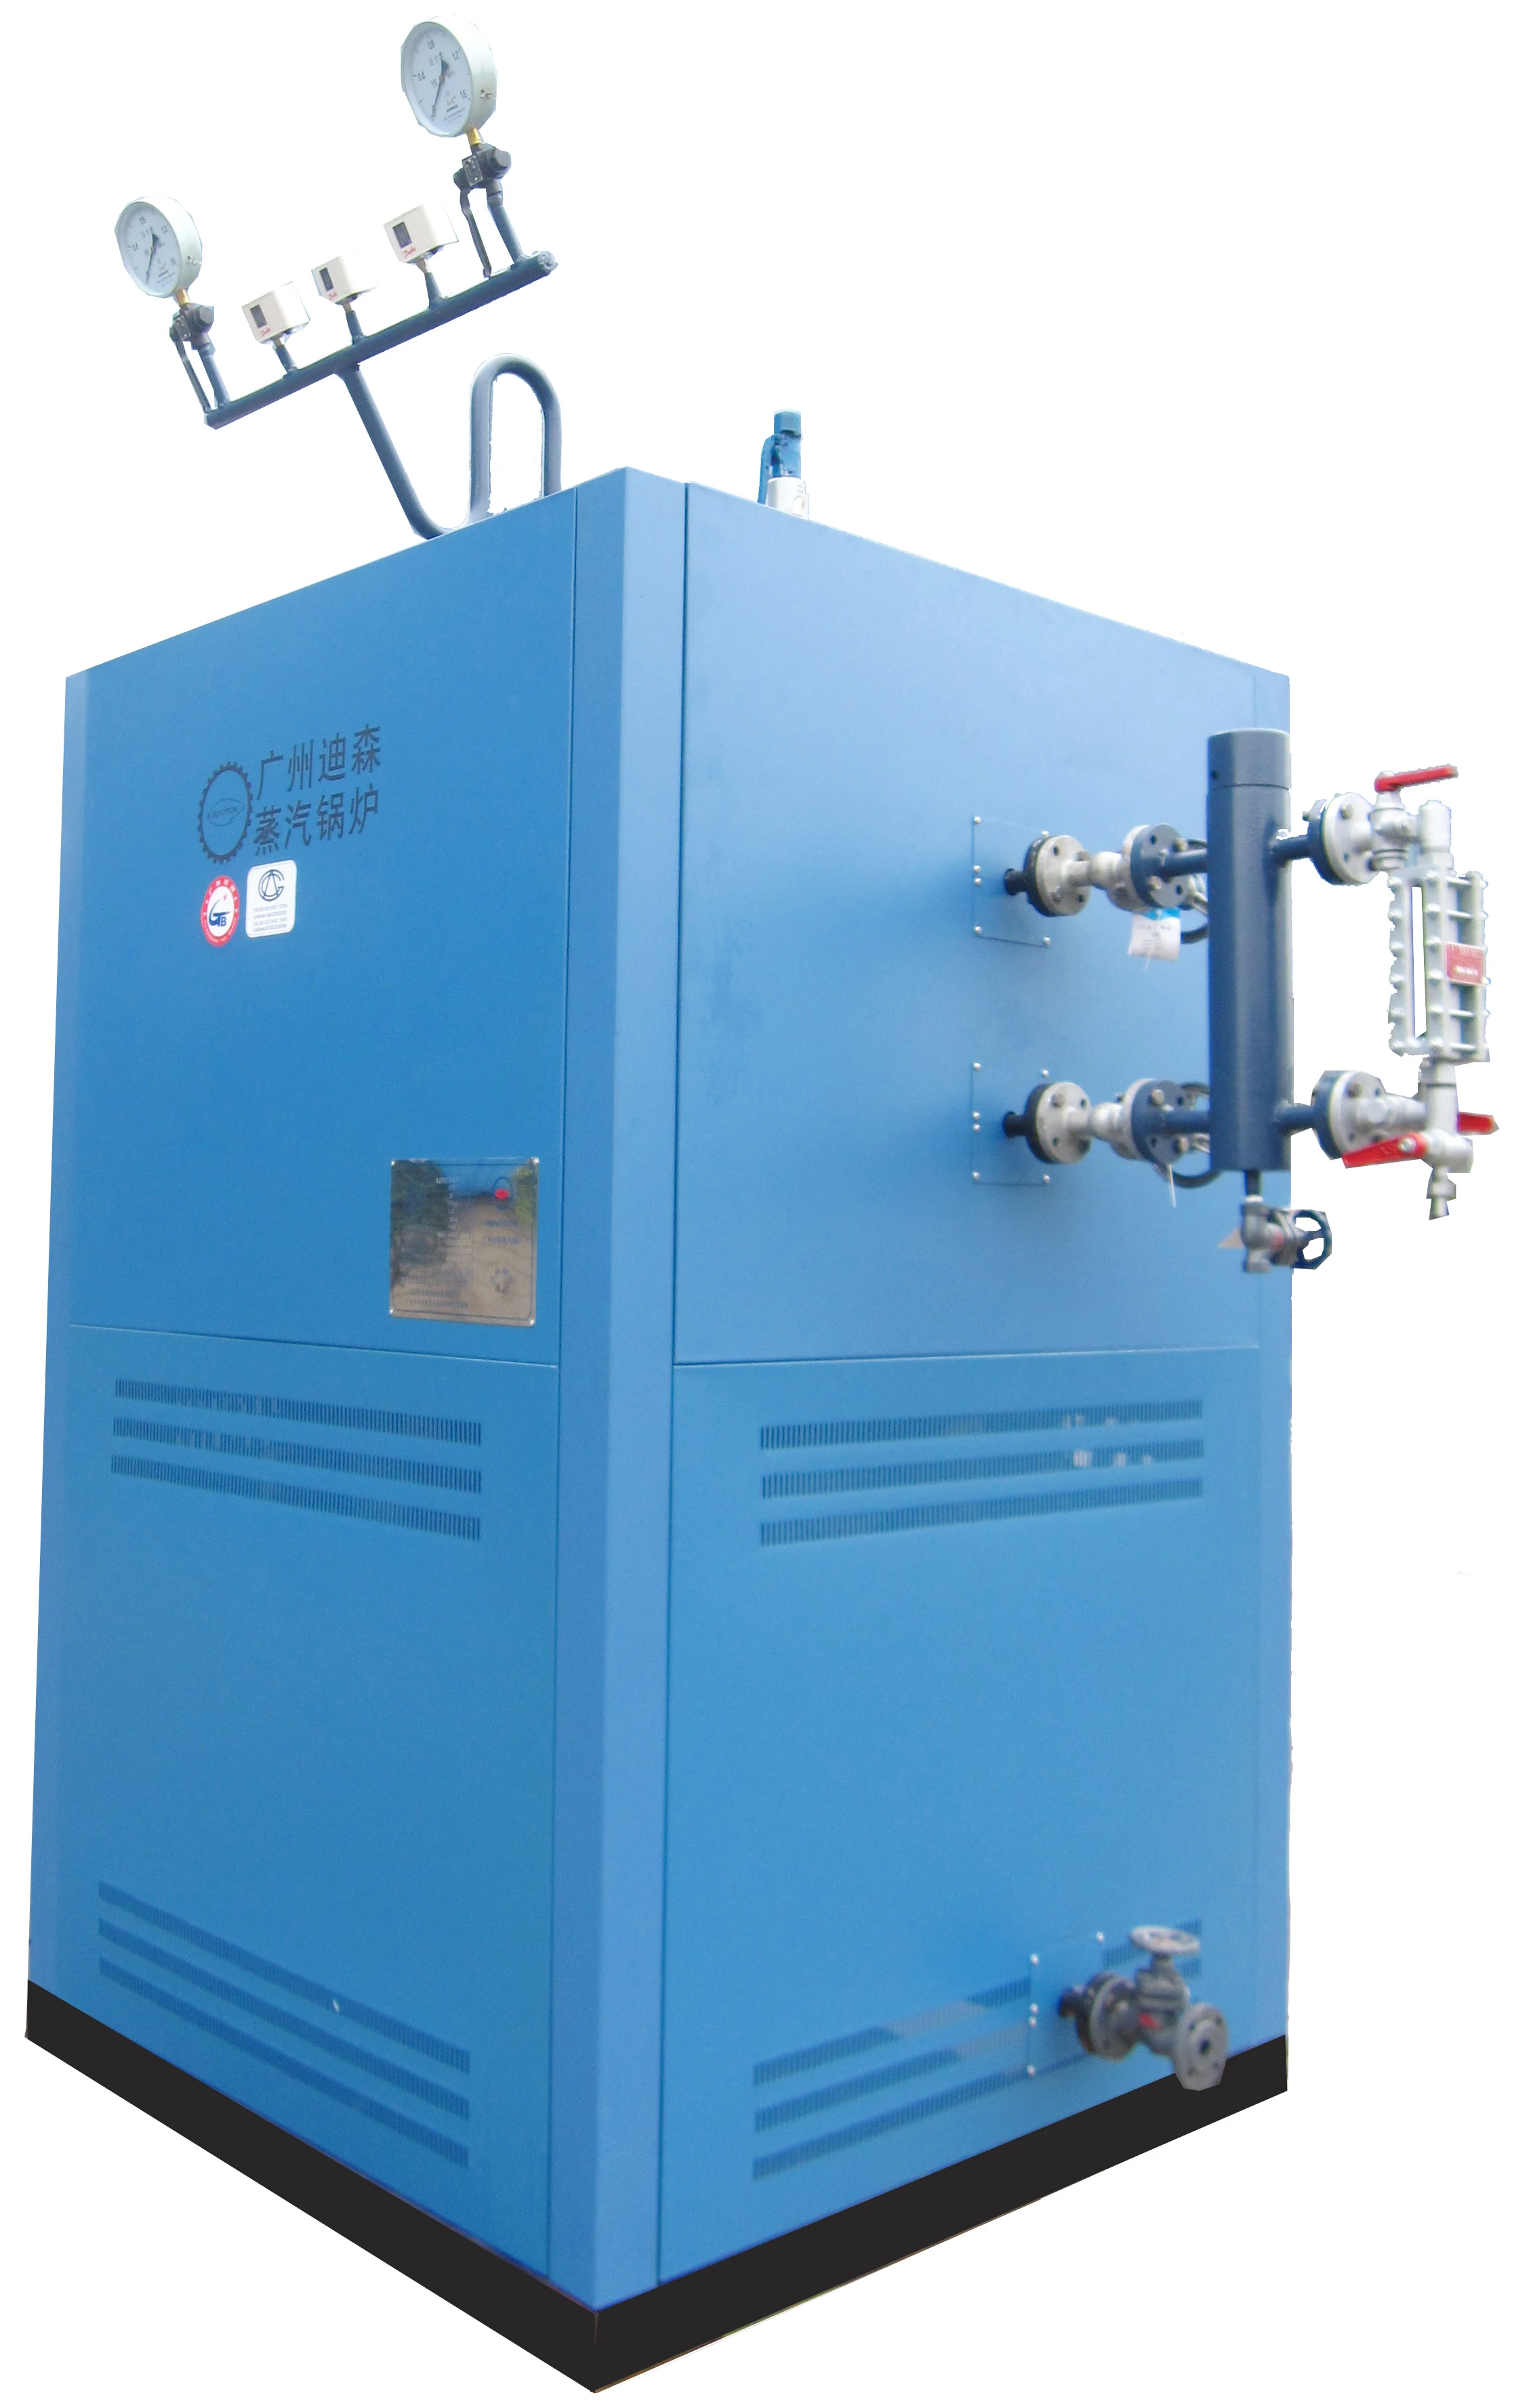 Steam boiler prices фото 105